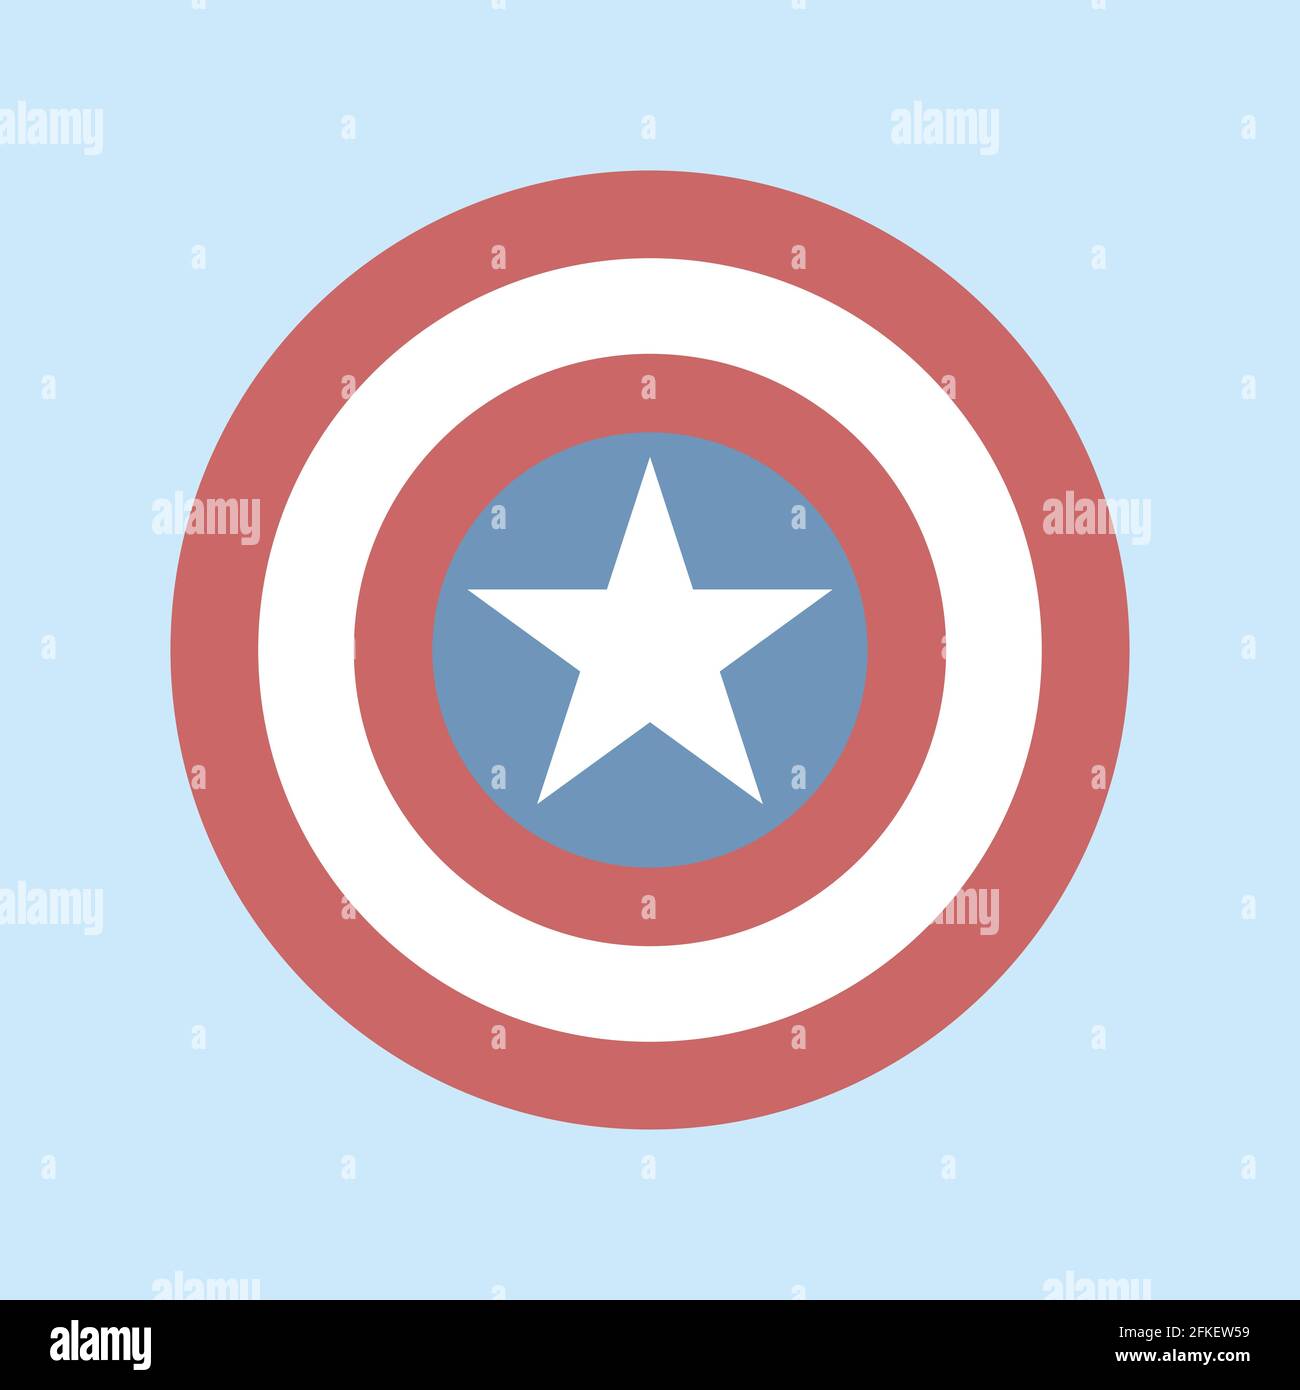 Captain America shield icon. Star and stripes logo. Flat digital vector illustration on blue background Stock Vector